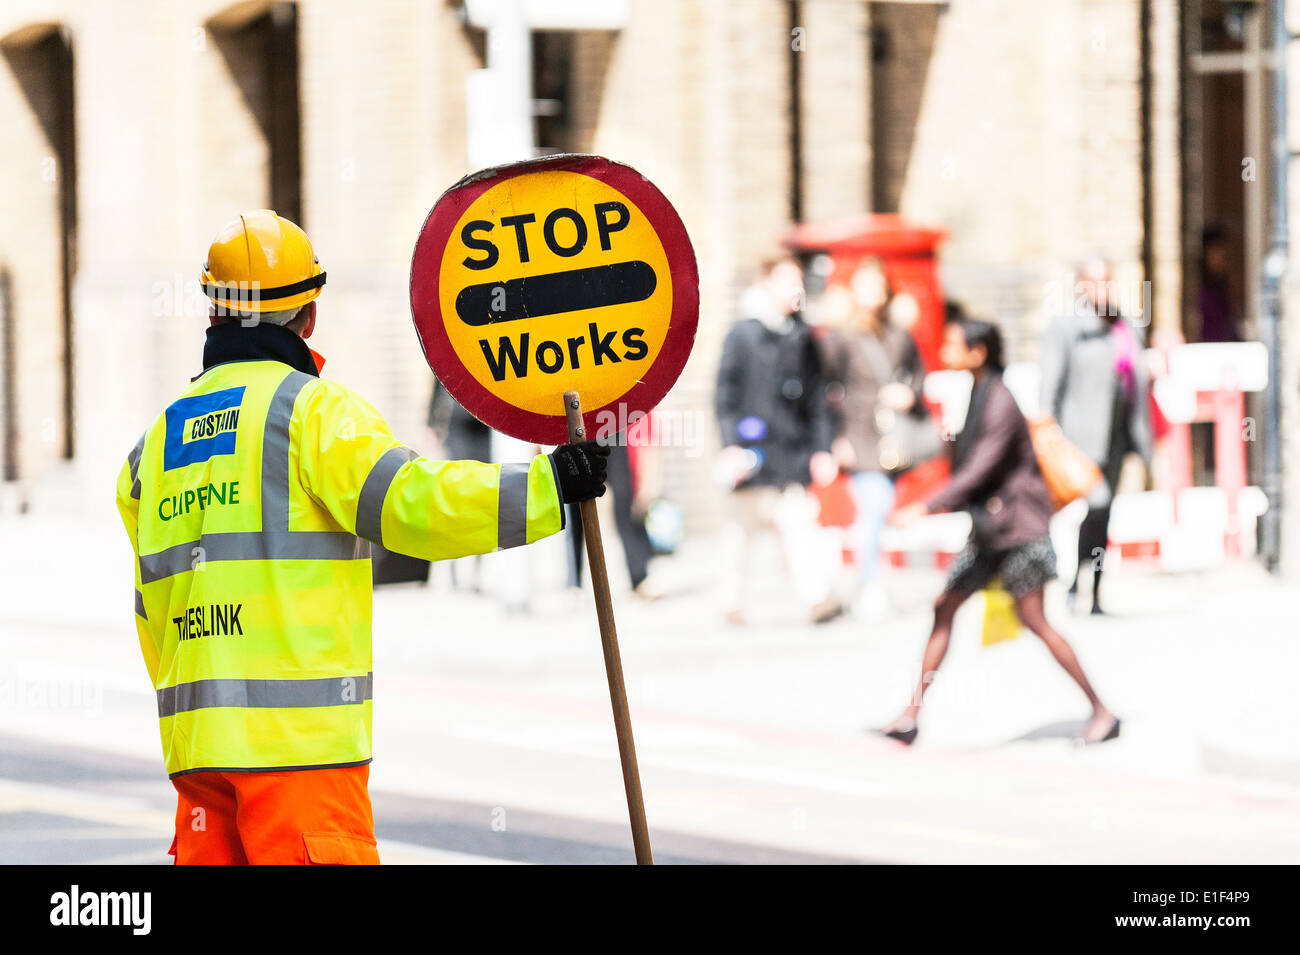 A construction worker holding a traffic stop sign. Stock Photo